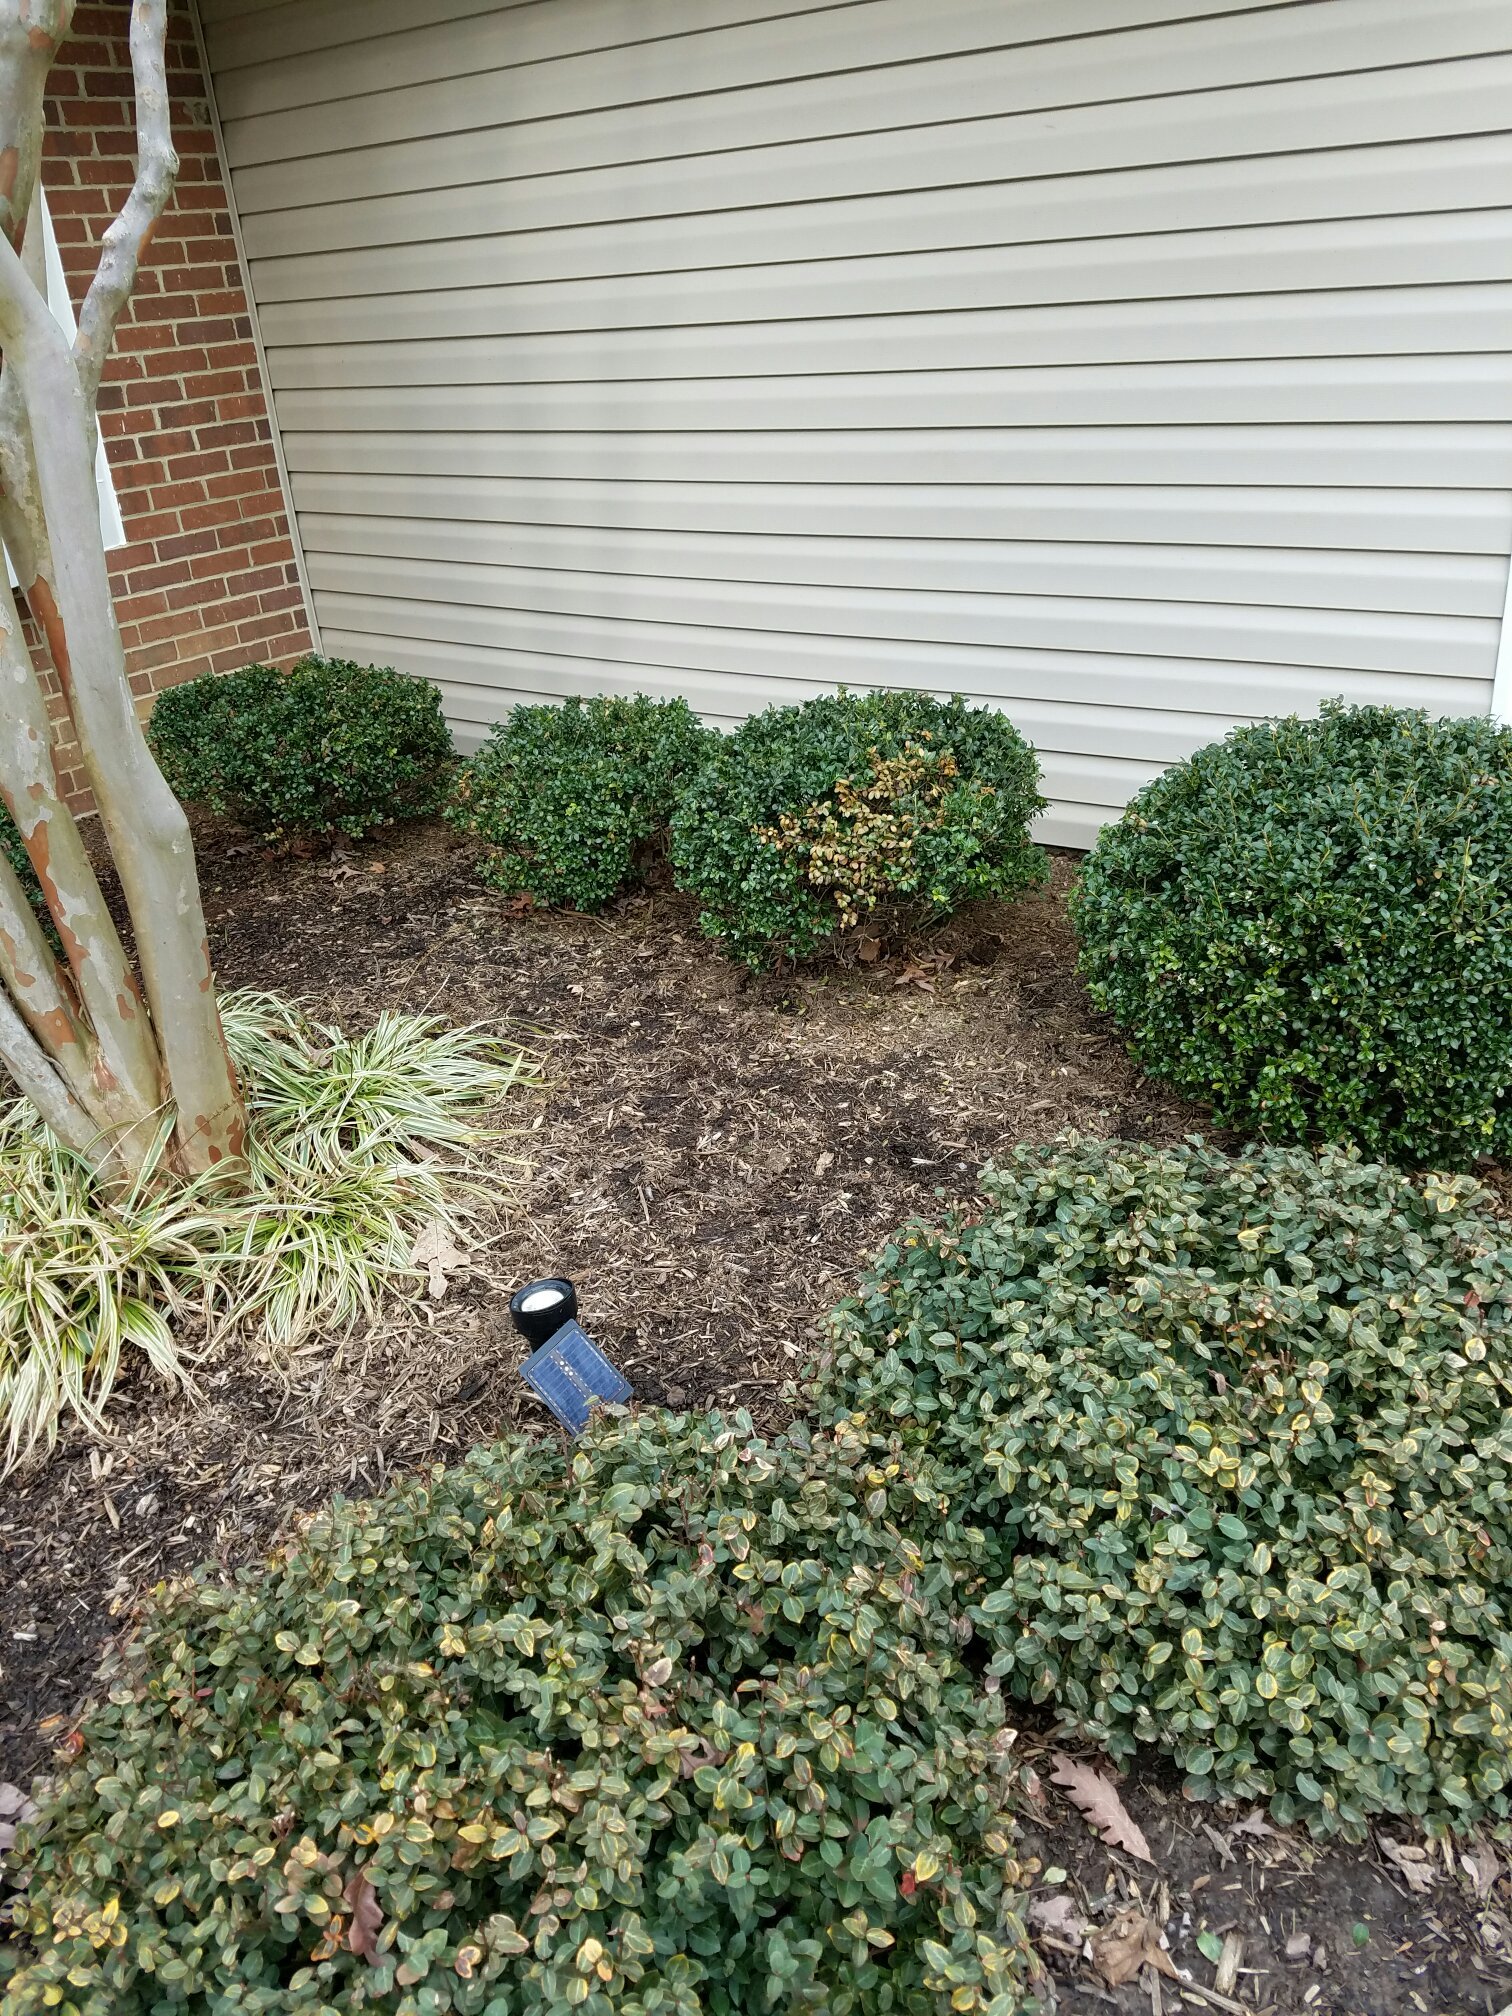 Sudden browning on ornamental shrubs #383232 - Ask Extension